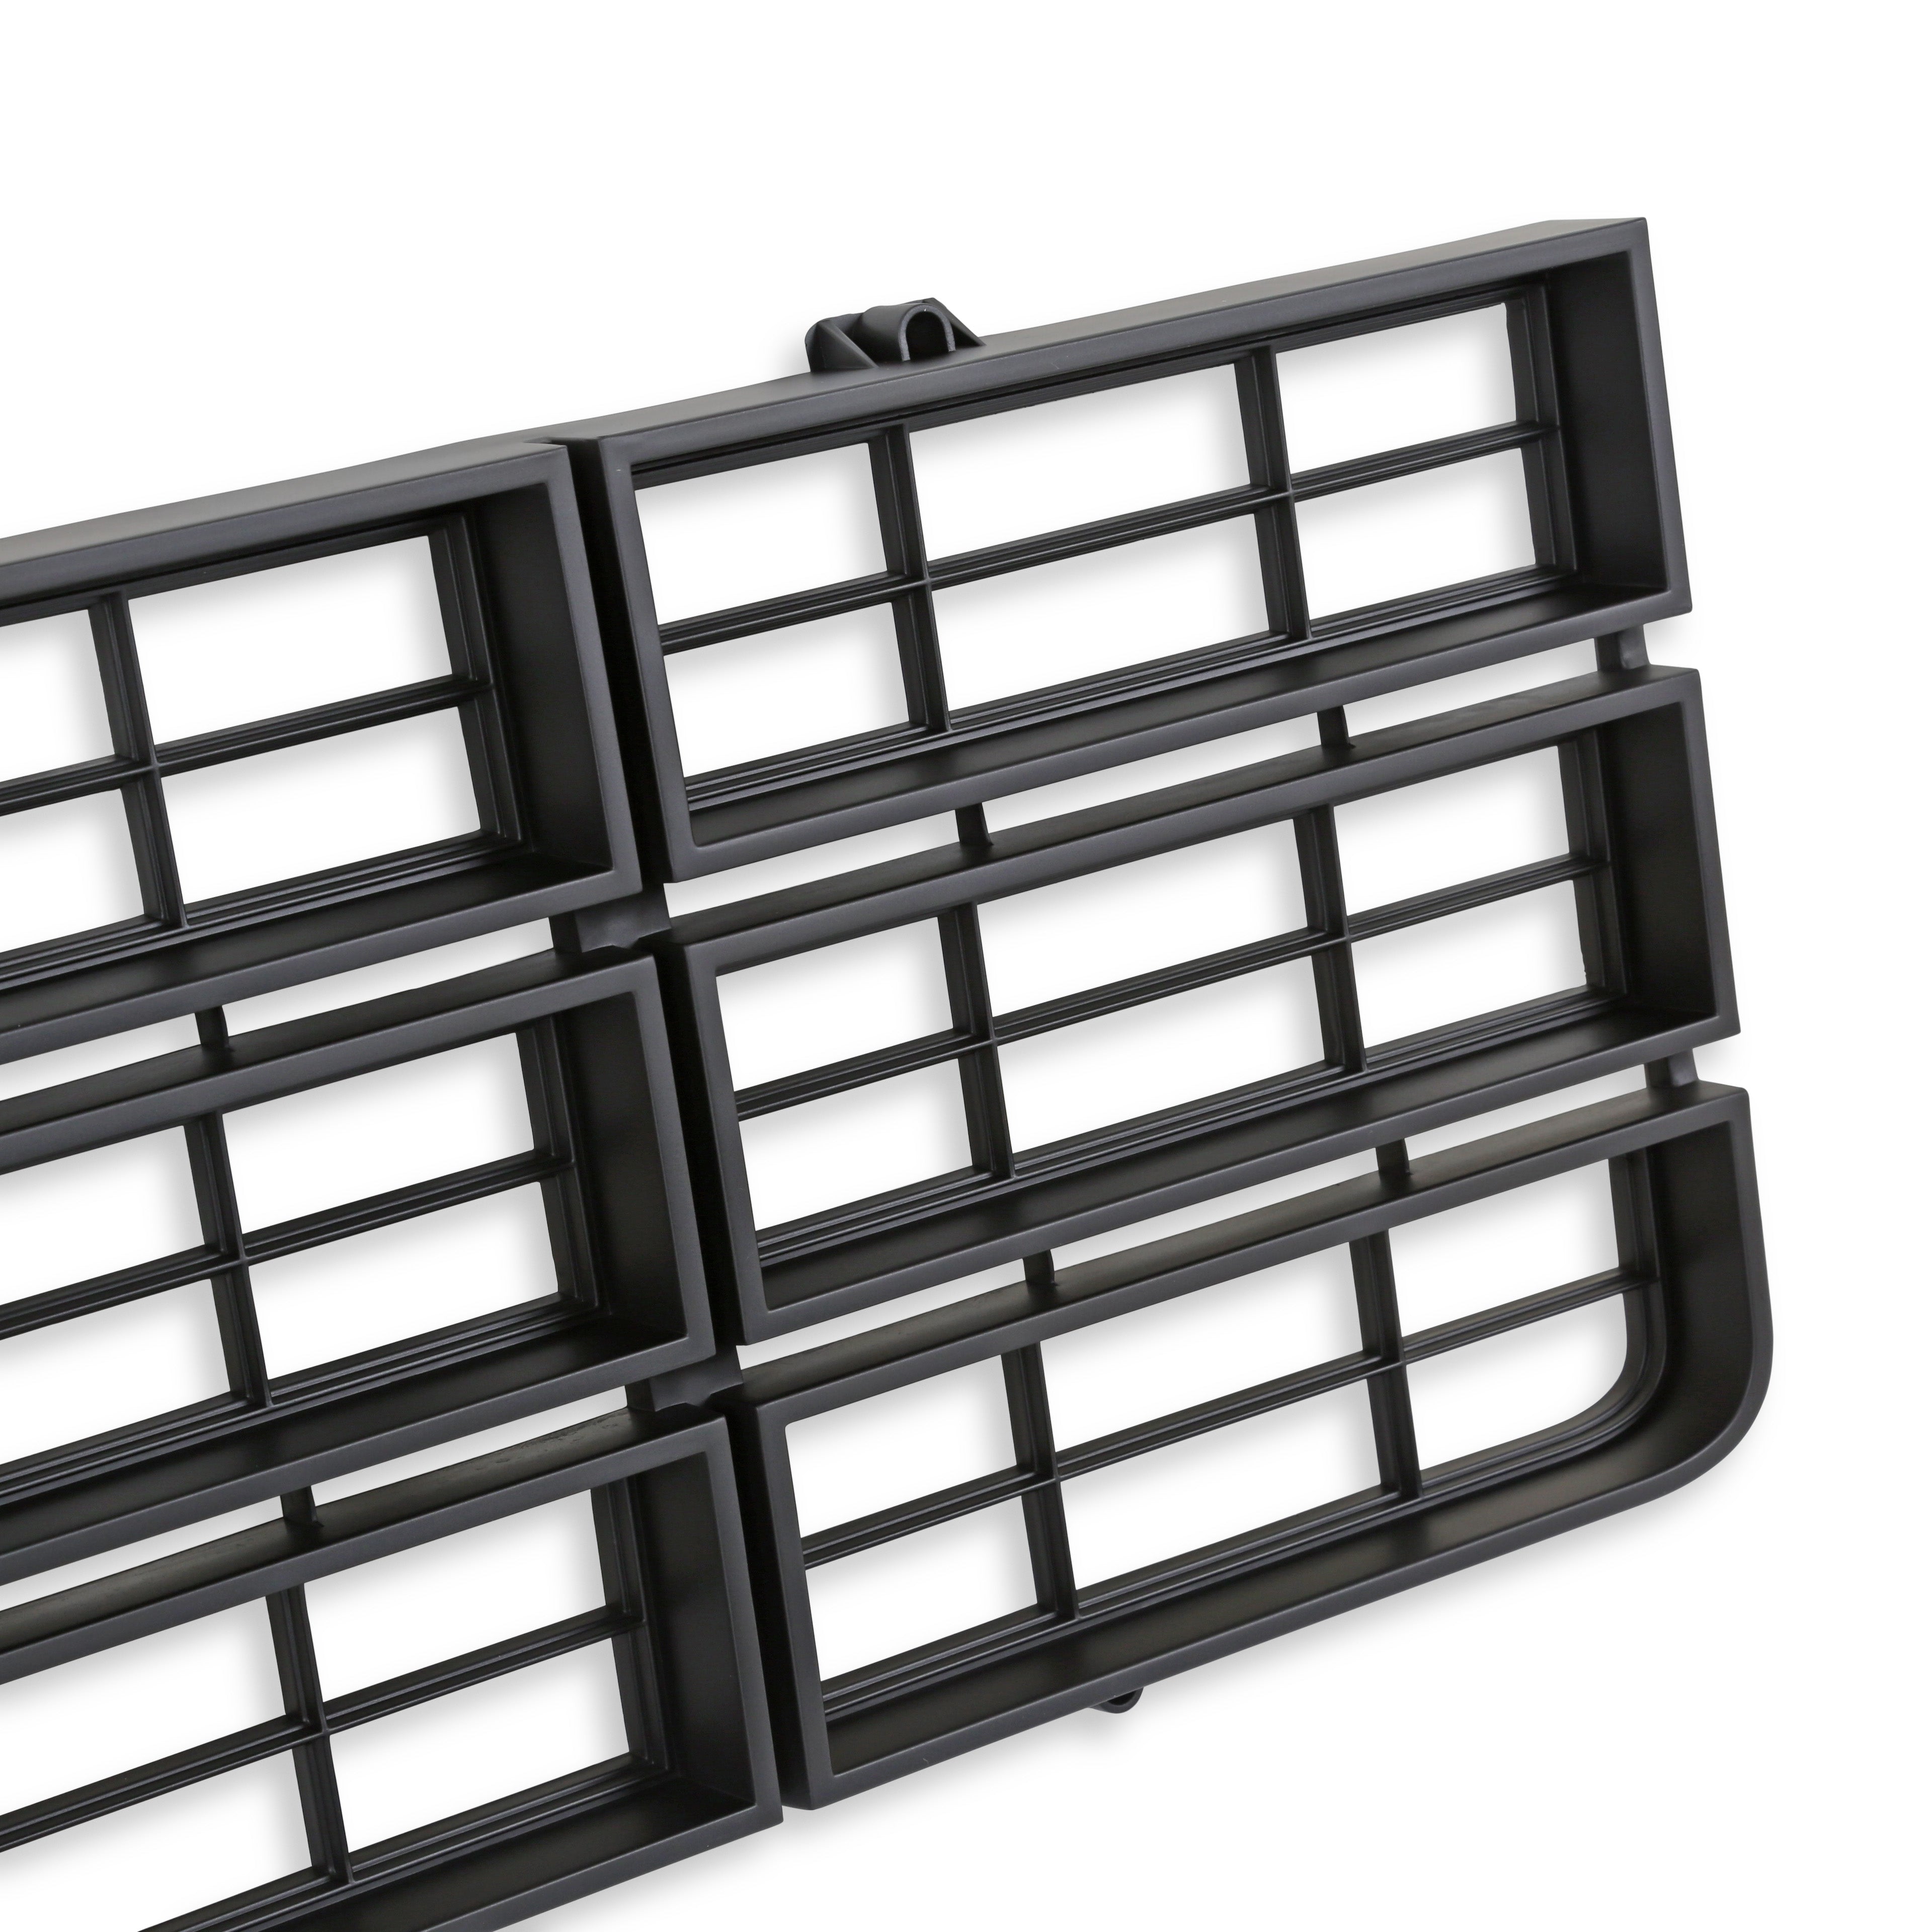 BROTHERS C/K Chevy Grille - w/ Bowtie - Black pn 04-170